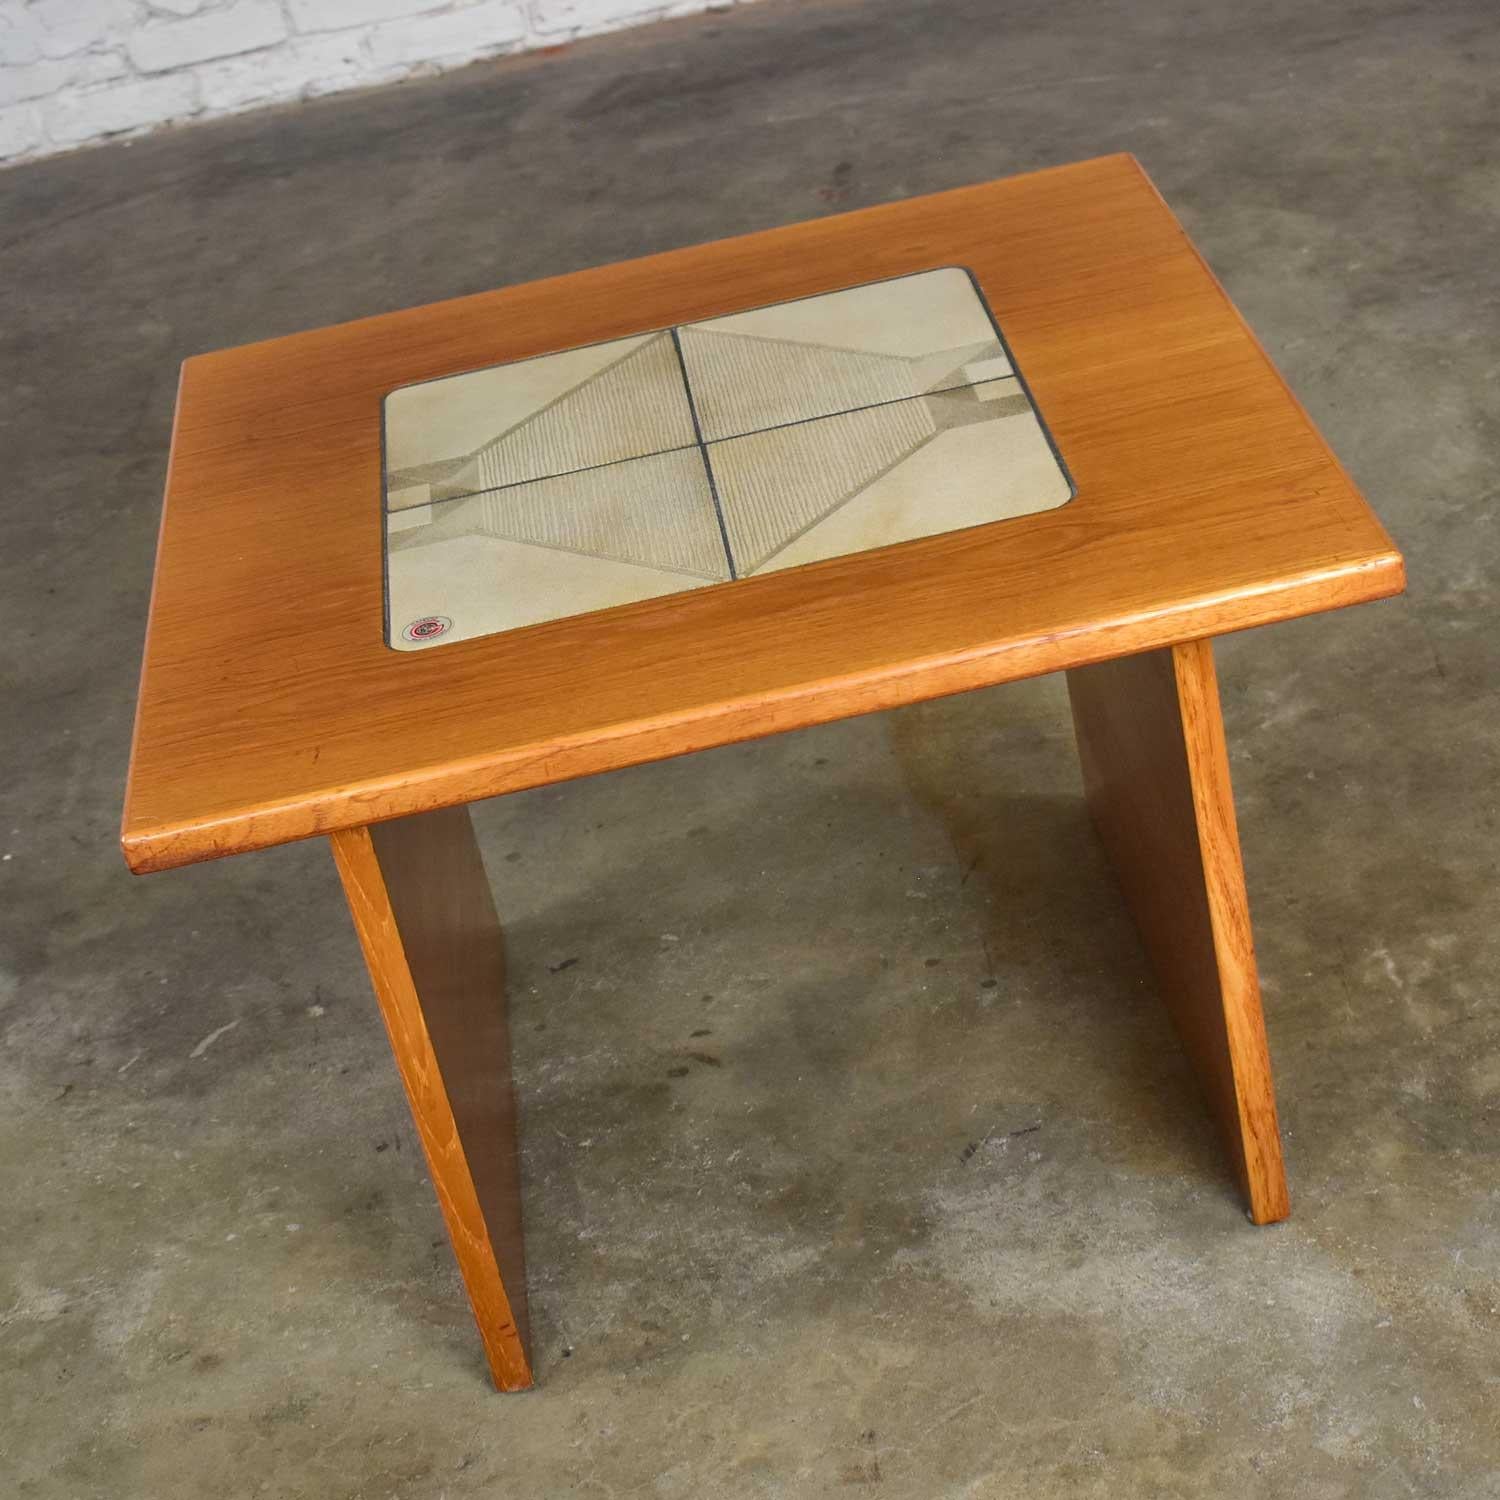 Fabulous Mid-Century Modern Scandinavian teak side table or end table with unique tile insert by Gangso Mobler. Gorgeous vintage condition with no outstanding flaws that we have detected. Please see photos. Circa 1978-1983.

Wow!! Just…. wow!! This